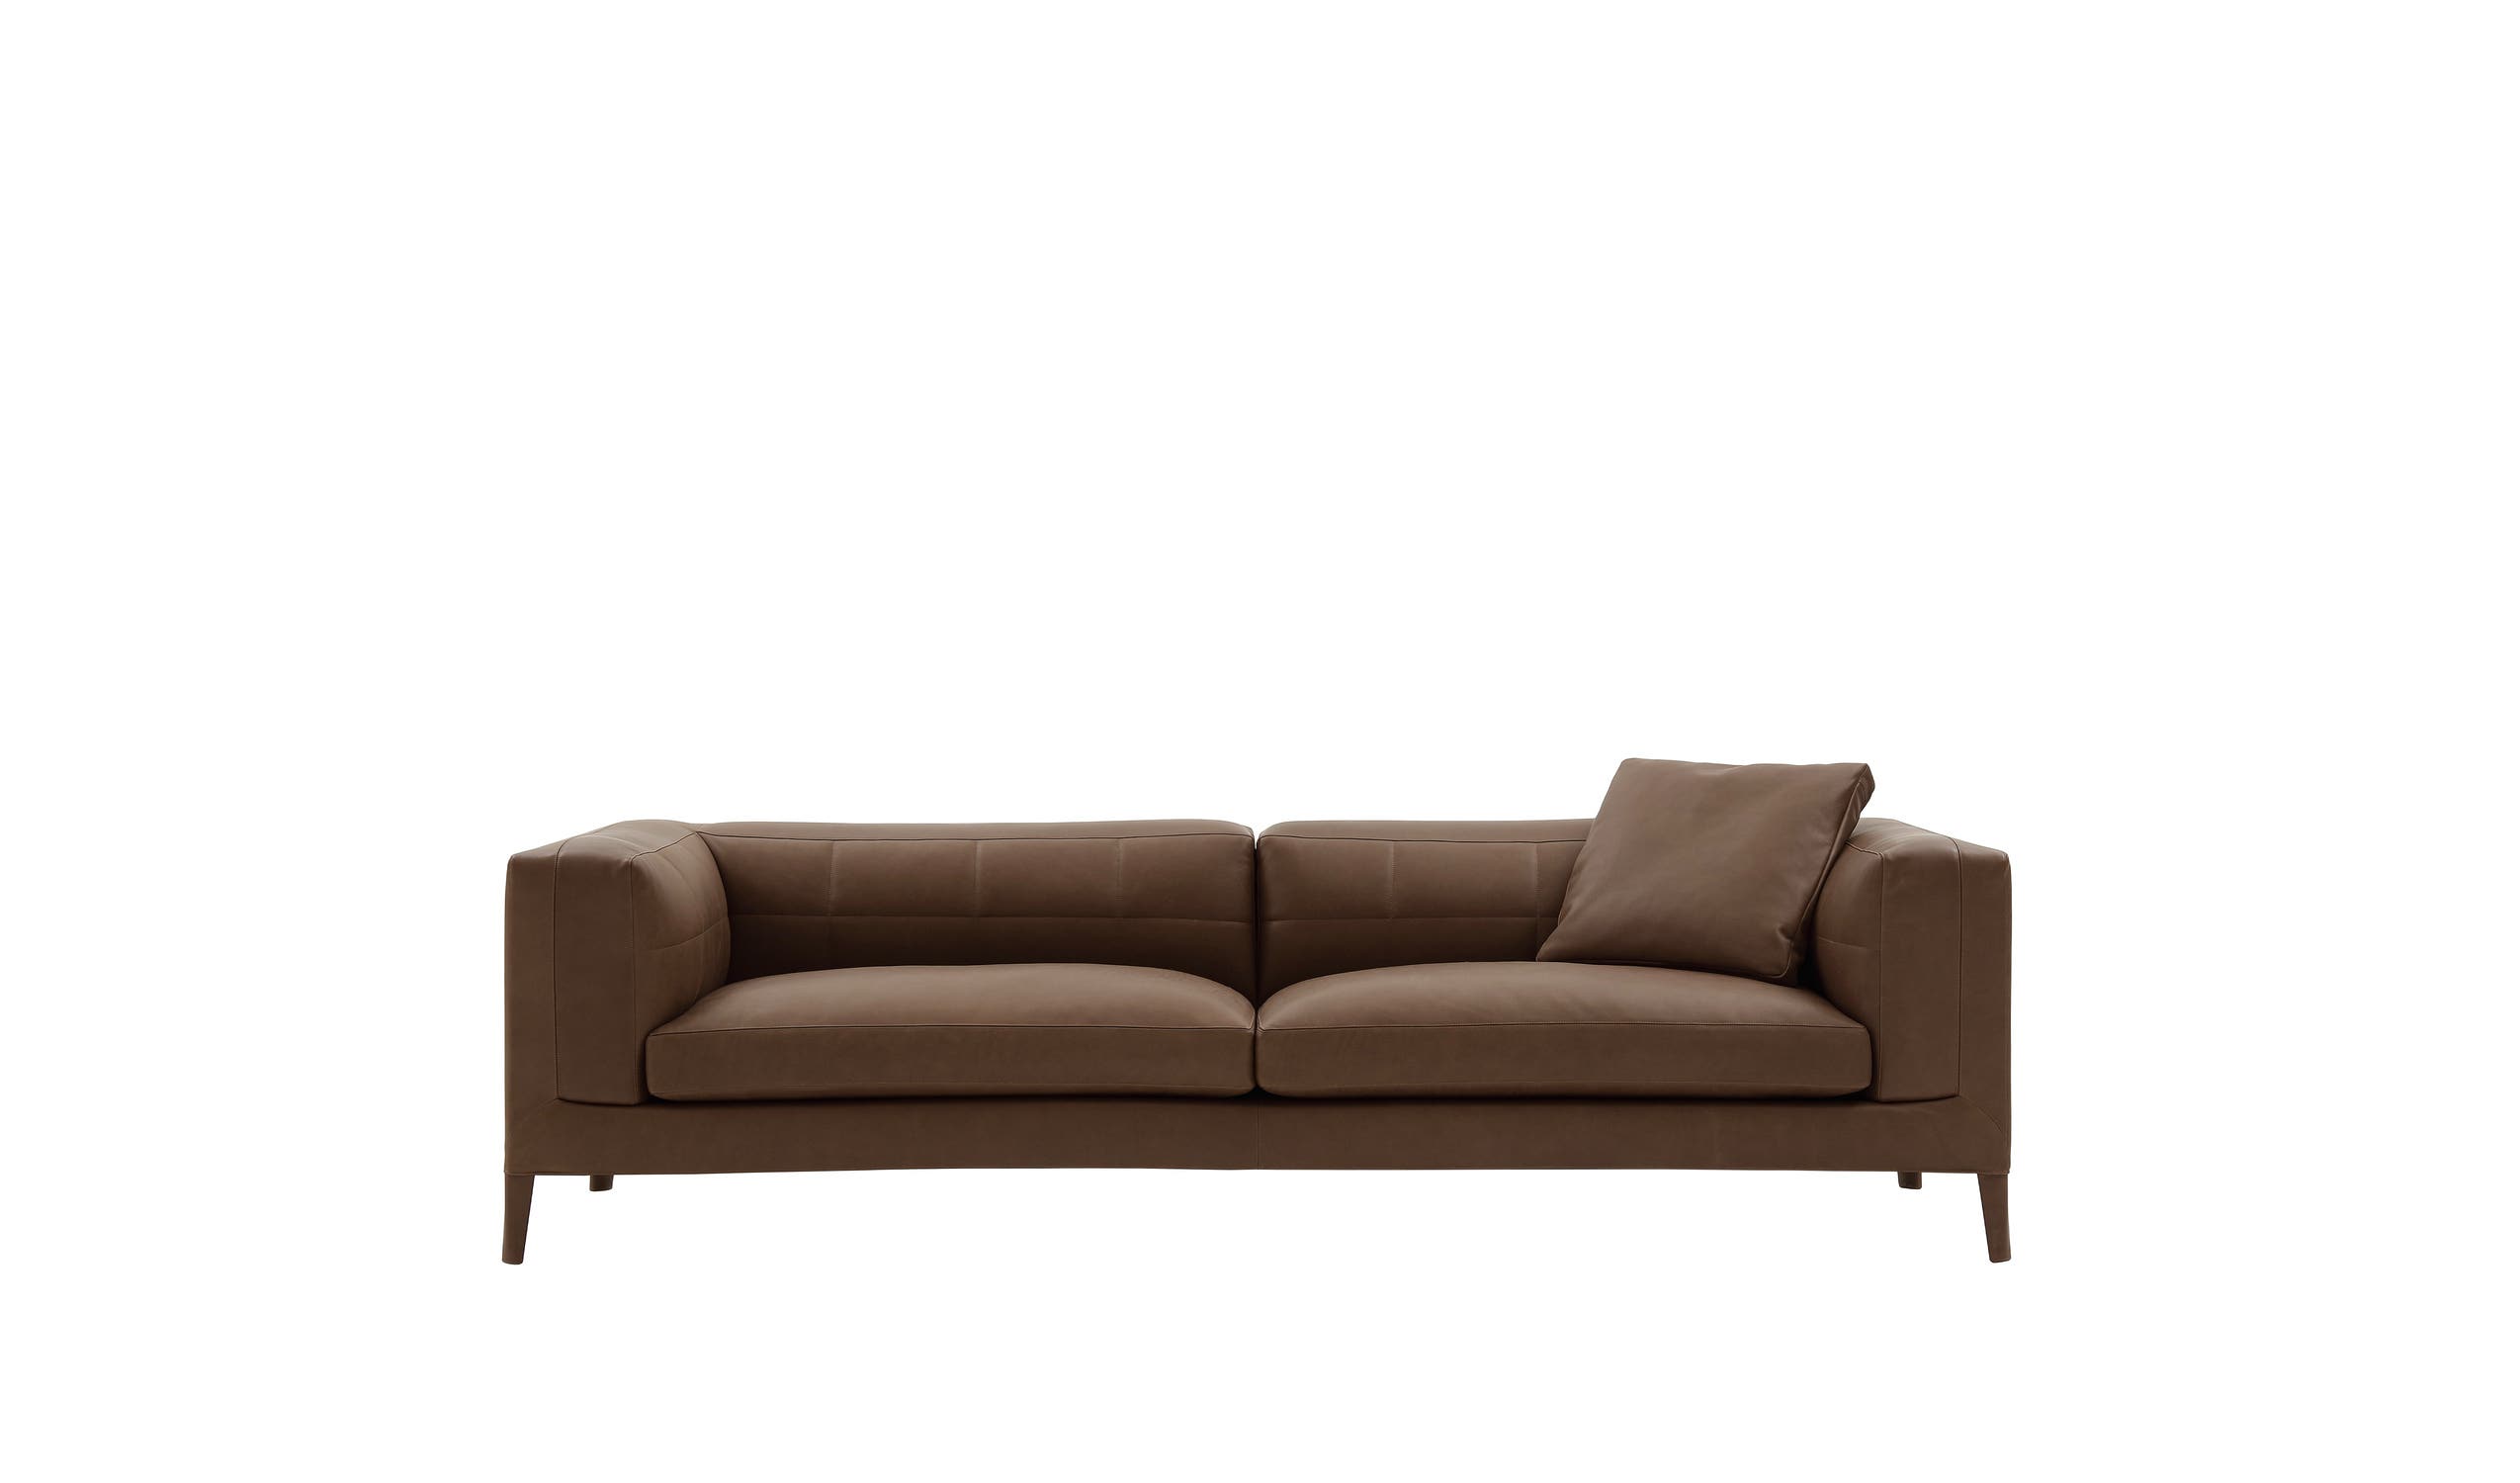 Dives Soft, How Much Do American Leather Sleeper Sofas Cost In Philippines